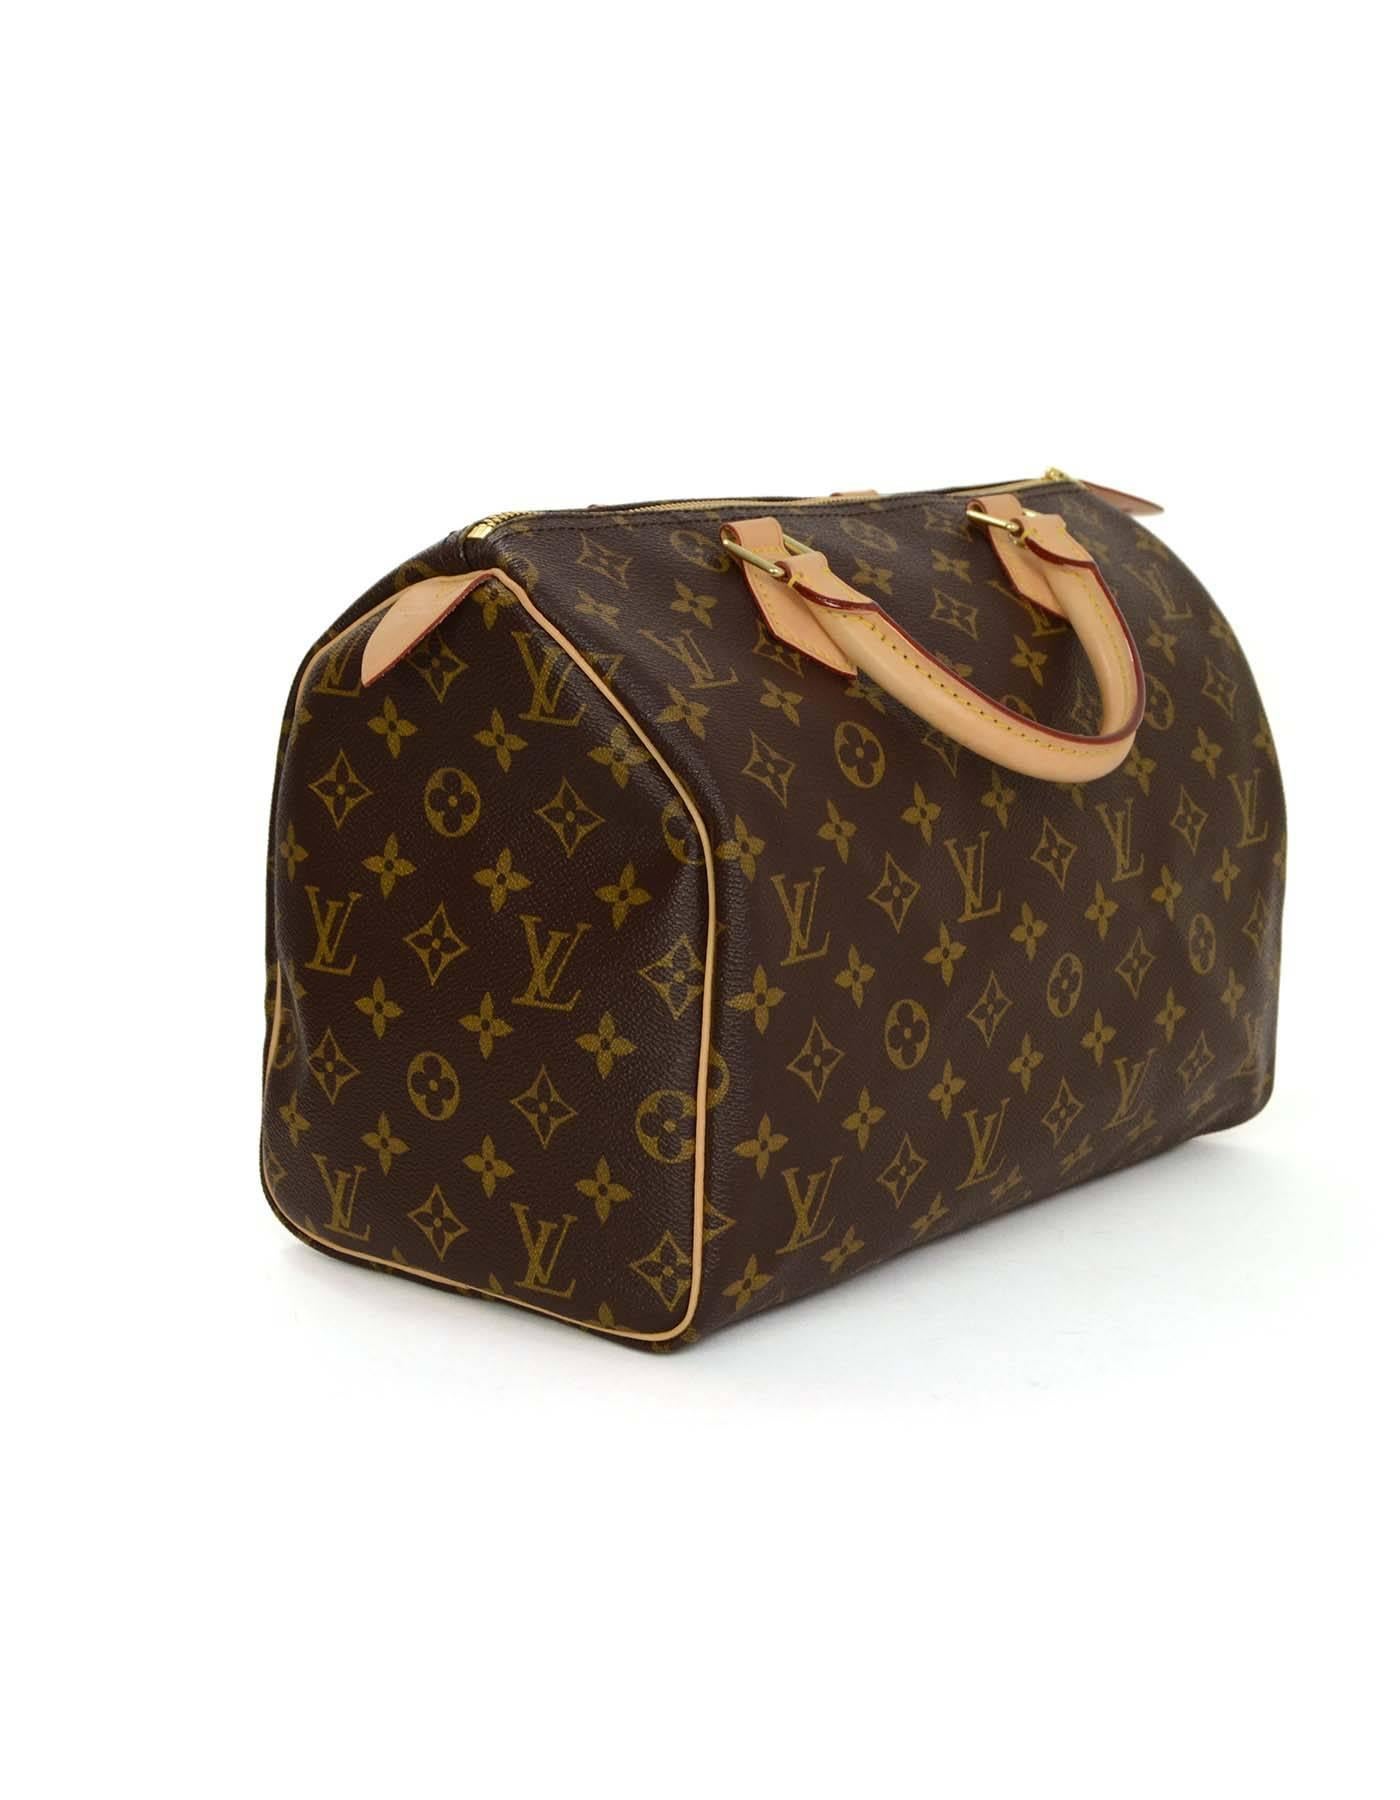 Louis Vuitton Monogram Speedy 30 Bag
Features leather rolled handles and leather trim/piping
Made in: U.S.A
Year of Production: 2015
Color: Brown and tan
Hardware: Goldtone
Materials: Coated canvas and leather
Lining: Brown